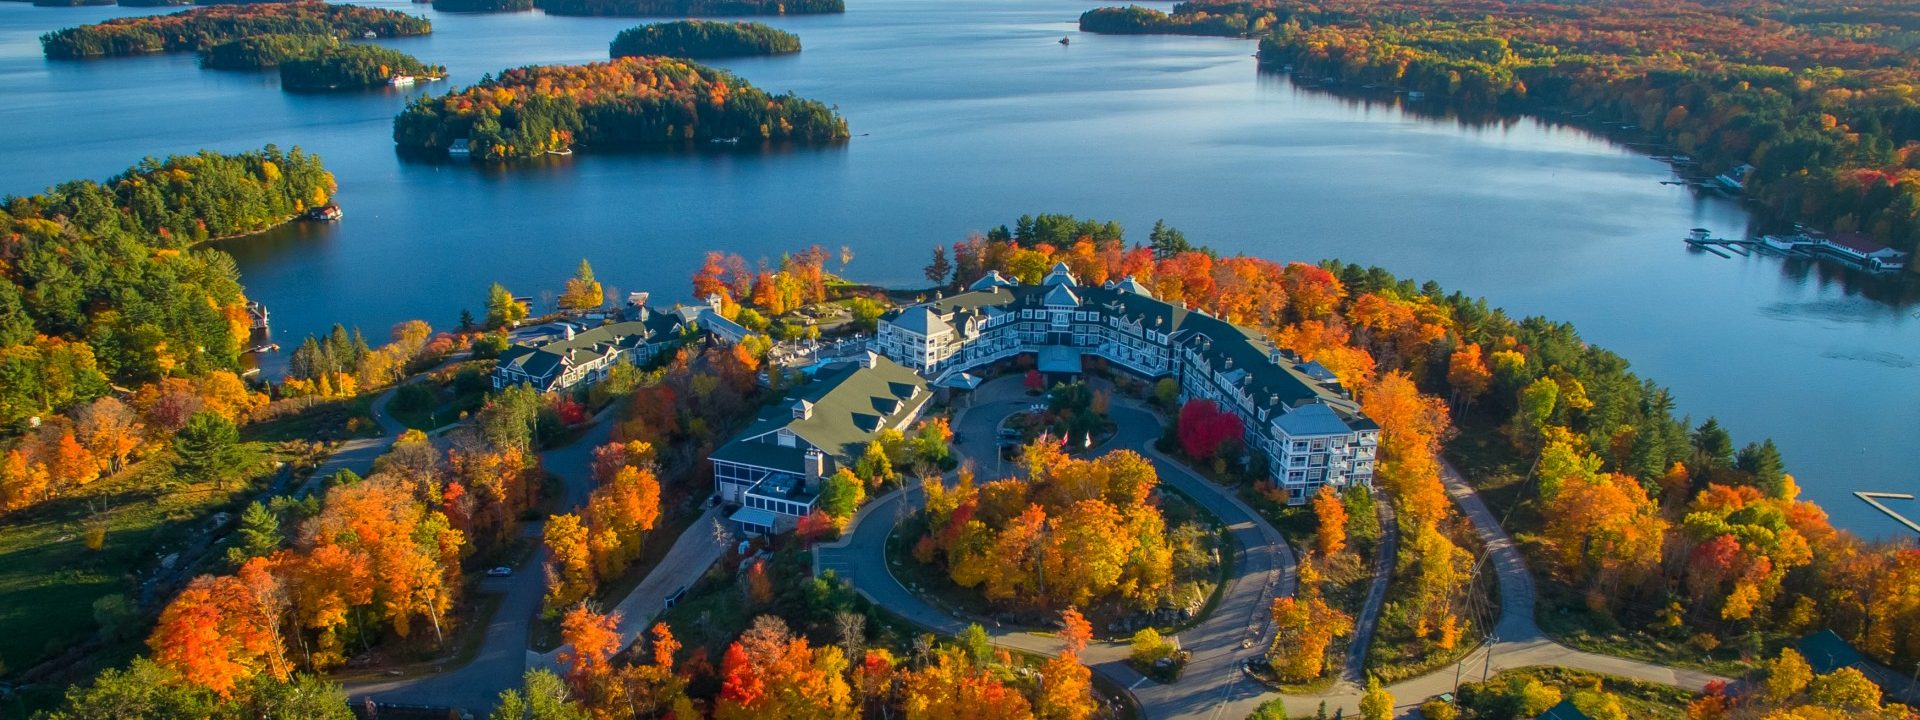 Top 6 Canadian hotels ideal for watching the changing of the leaves this fall